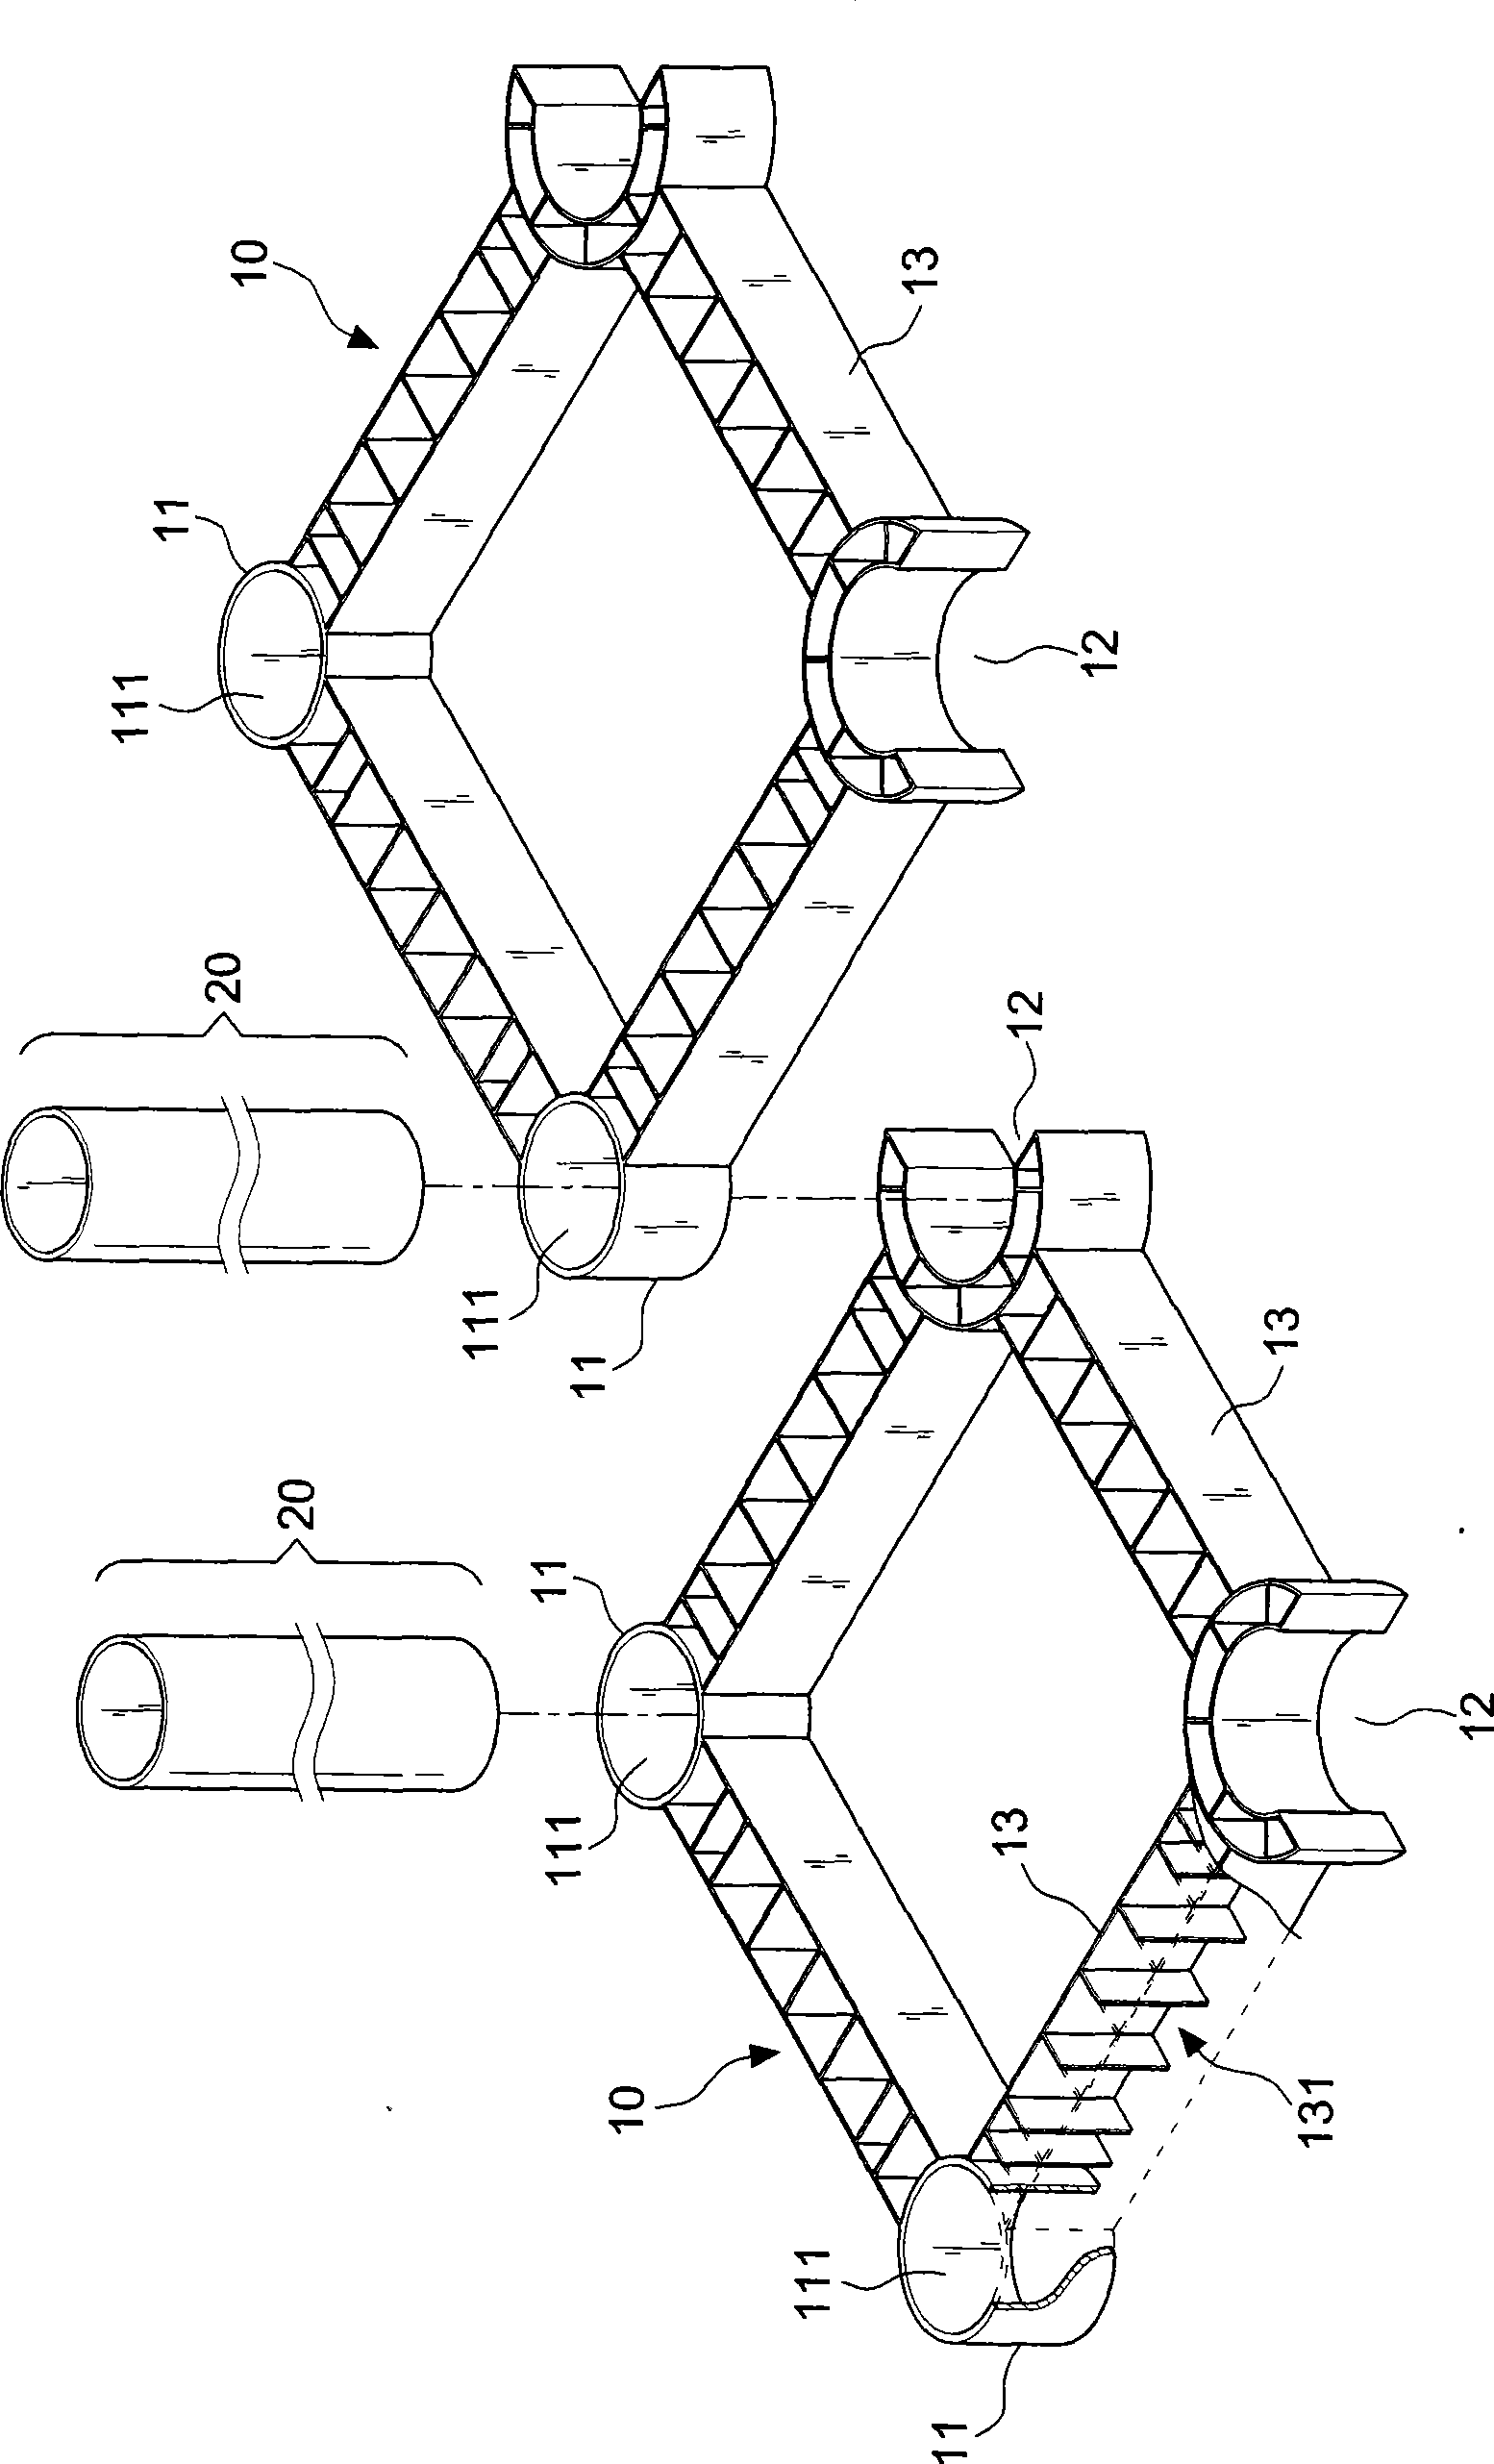 Tenon joint type spatial mesh structure